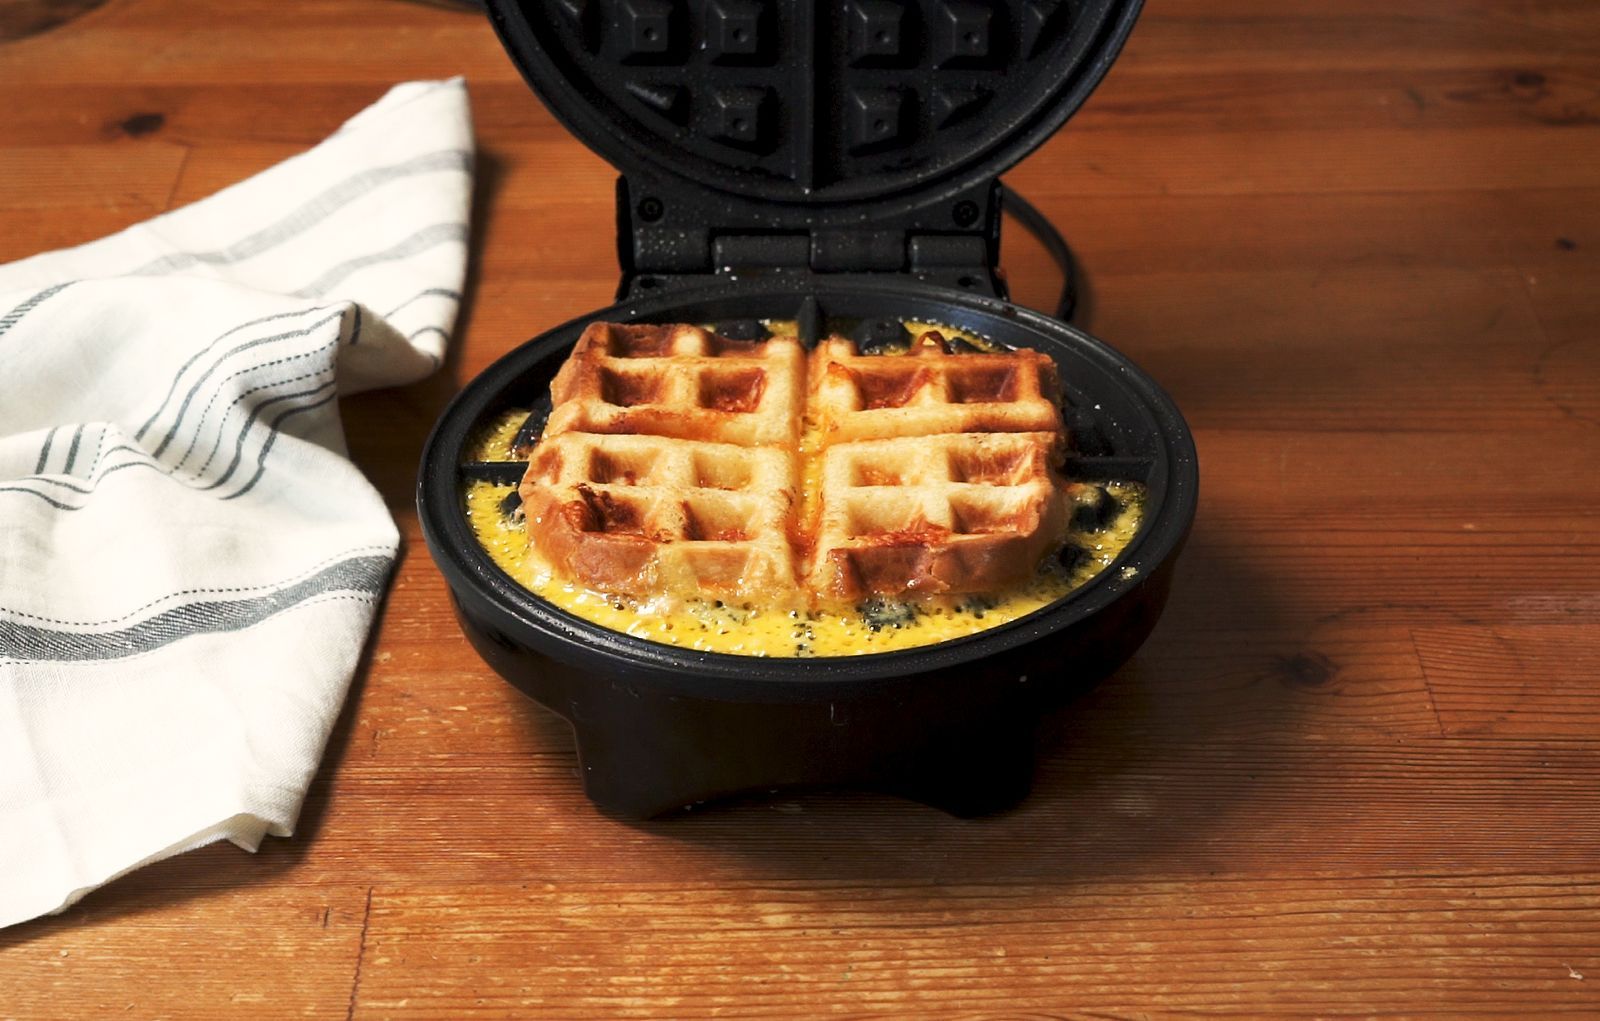 How To Make Grilled Cheese In A Waffle Iron